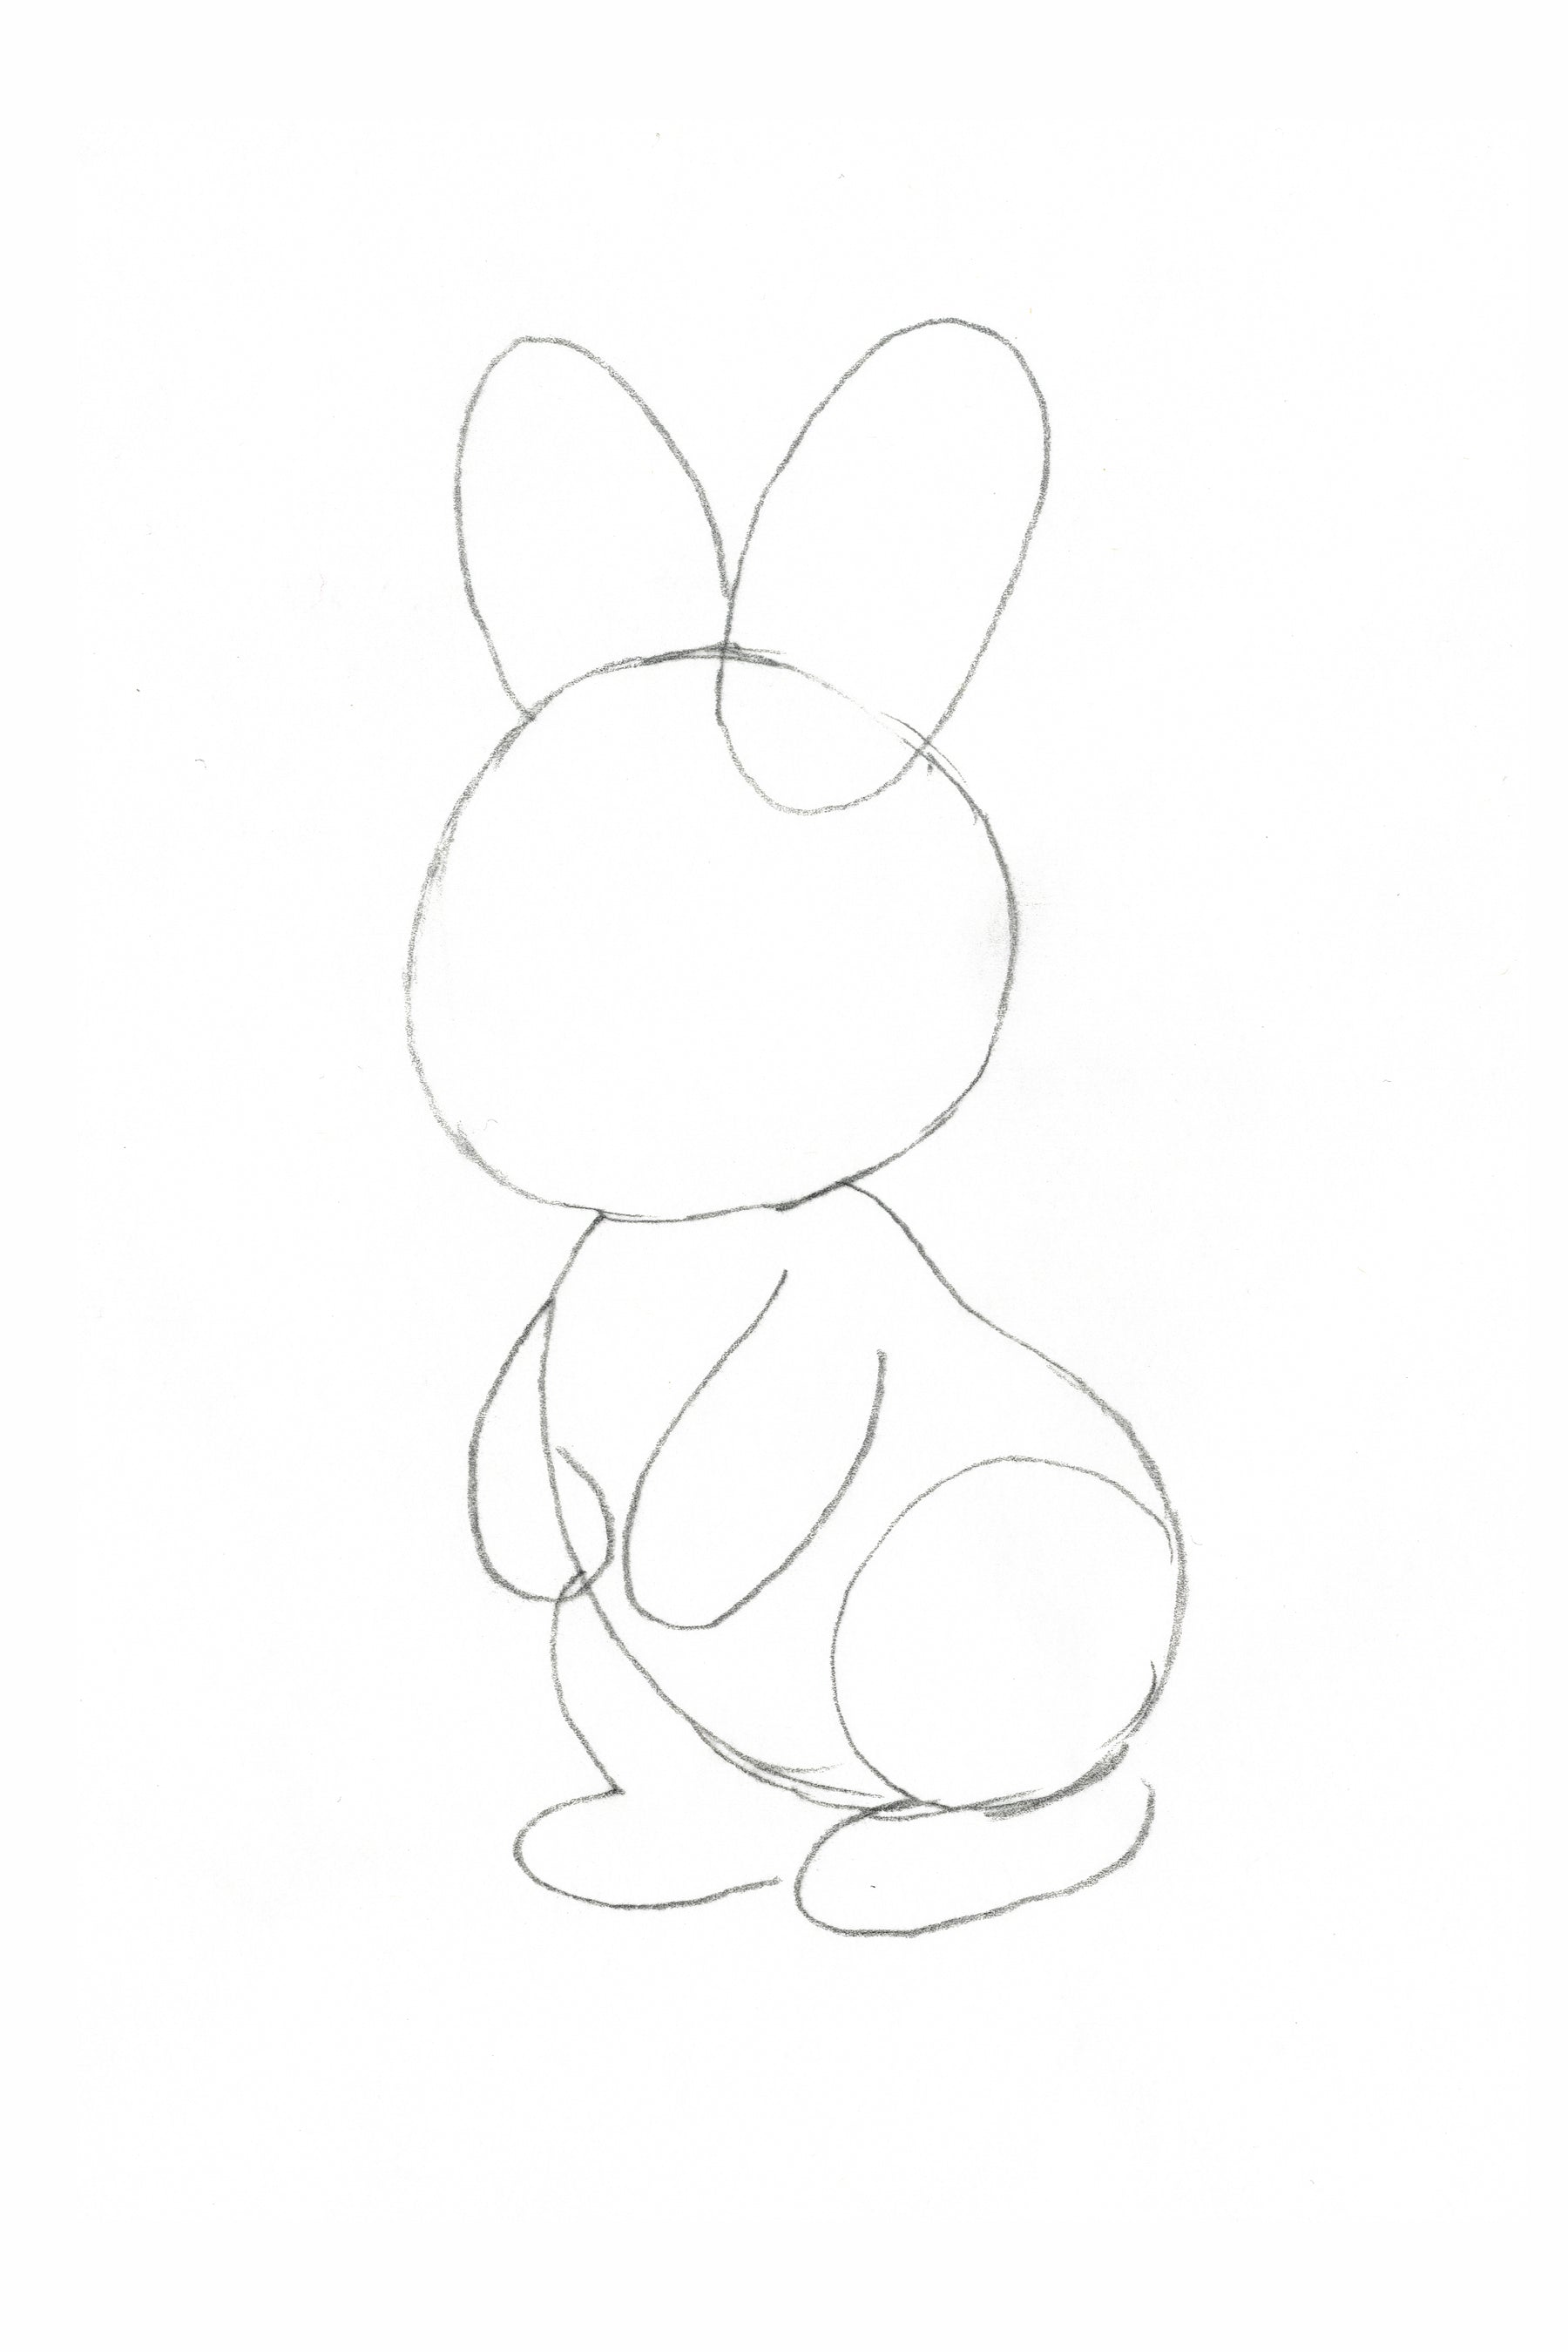 Bunny step two